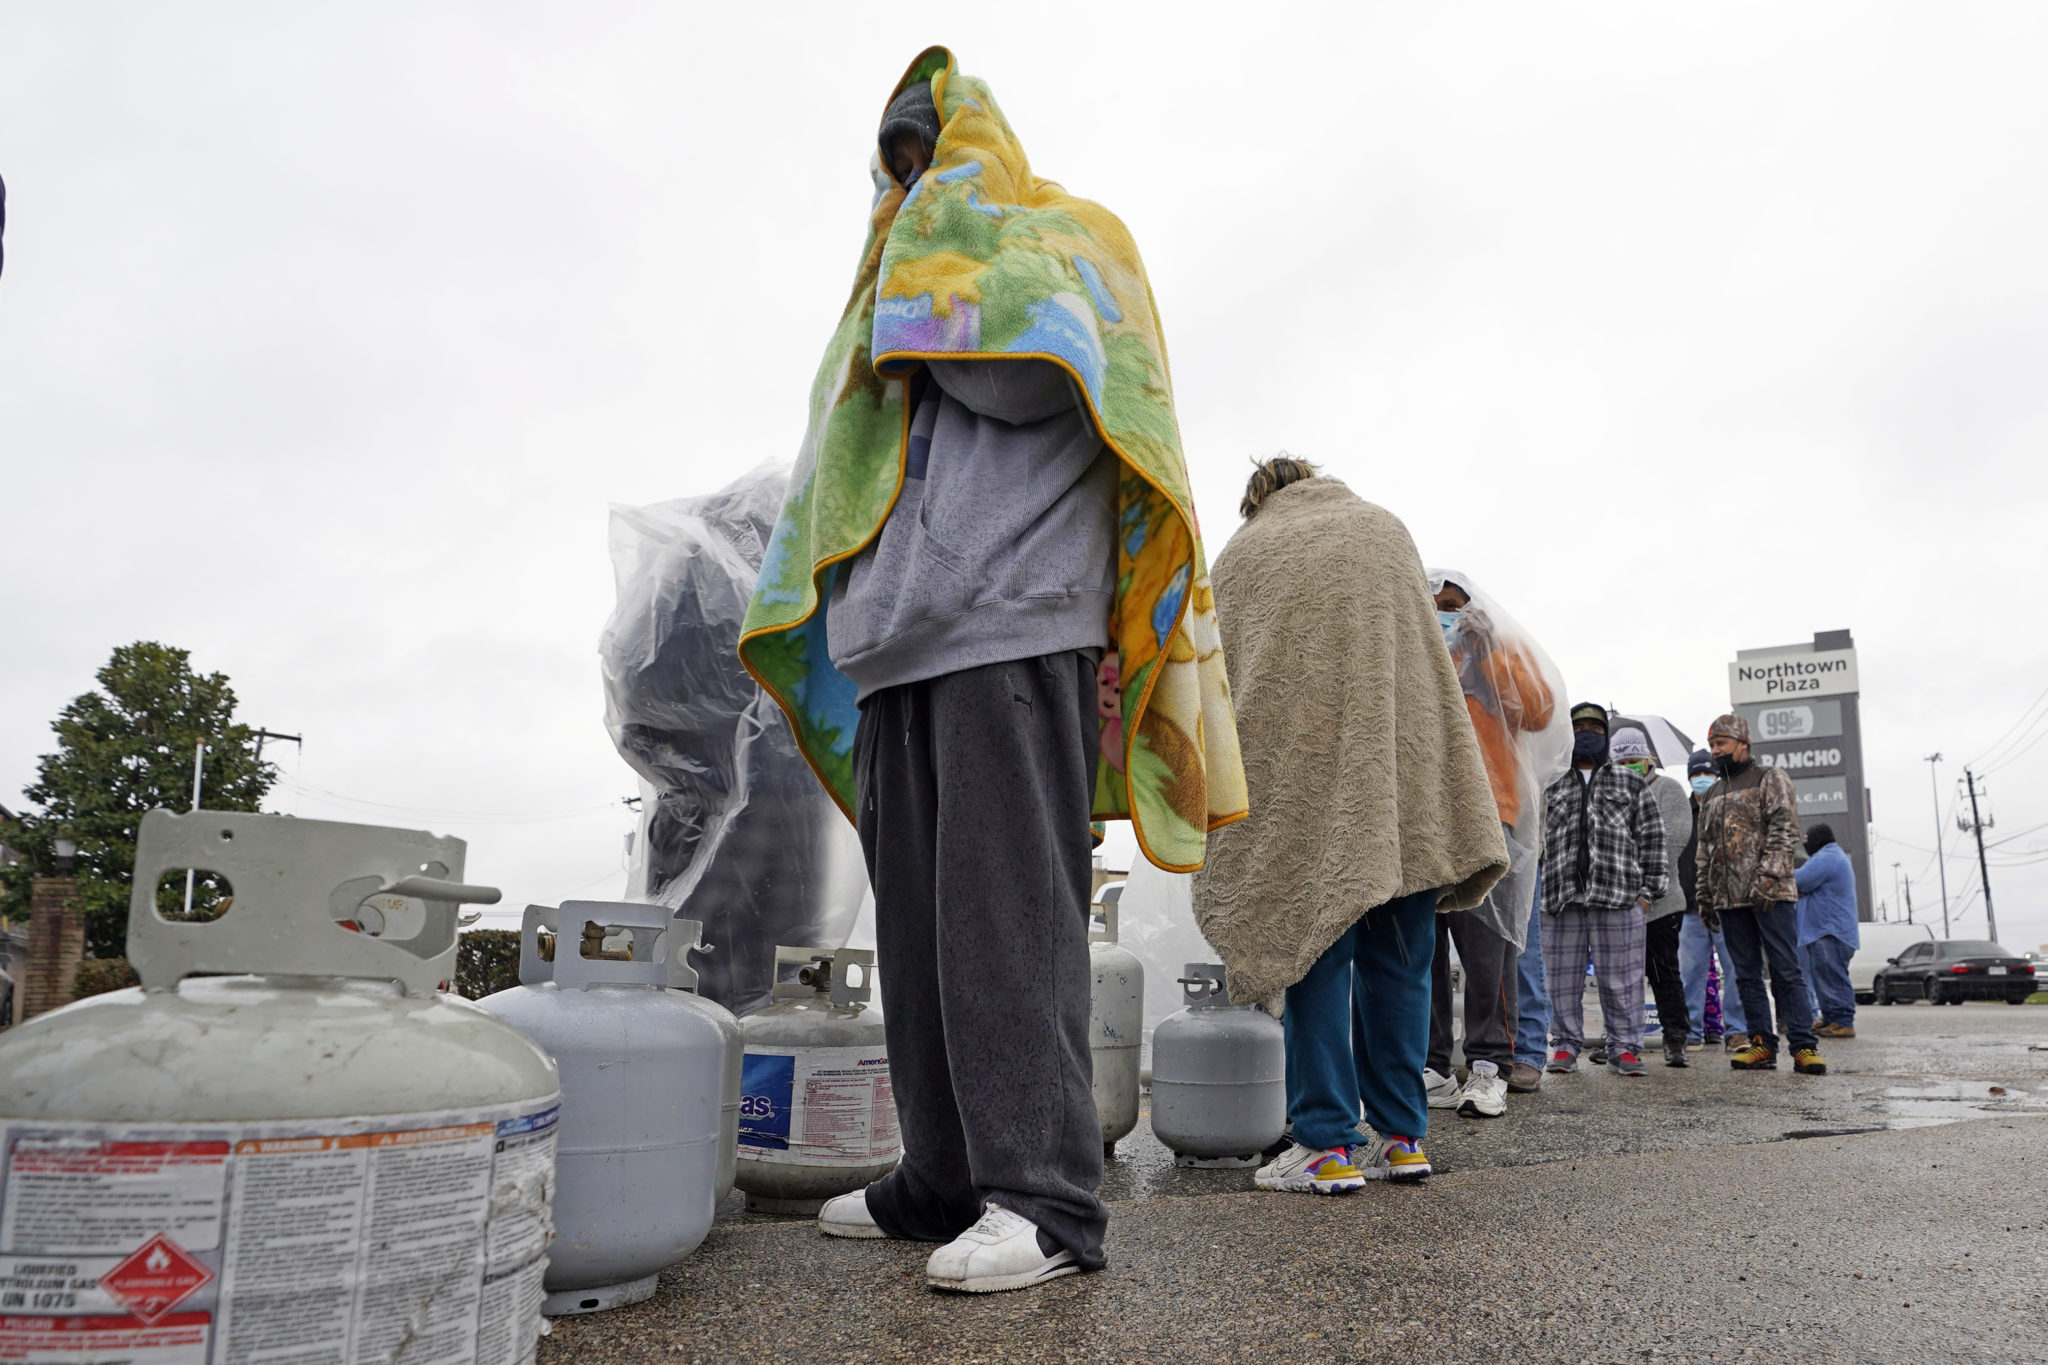 Carlos Mandez waits in line to fill his propane tanks Wednesday, Feb. 17, 2021, in Houston. Customers had to wait over an hour in the freezing rain to fill their tanks. Millions in Texas still had no power after a historic snowfall and single-digit temperatures created a surge of demand for electricity to warm up homes unaccustomed to such extreme lows, buckling the state's power grid and causing widespread blackouts. (AP Photo/David J. Phillip)